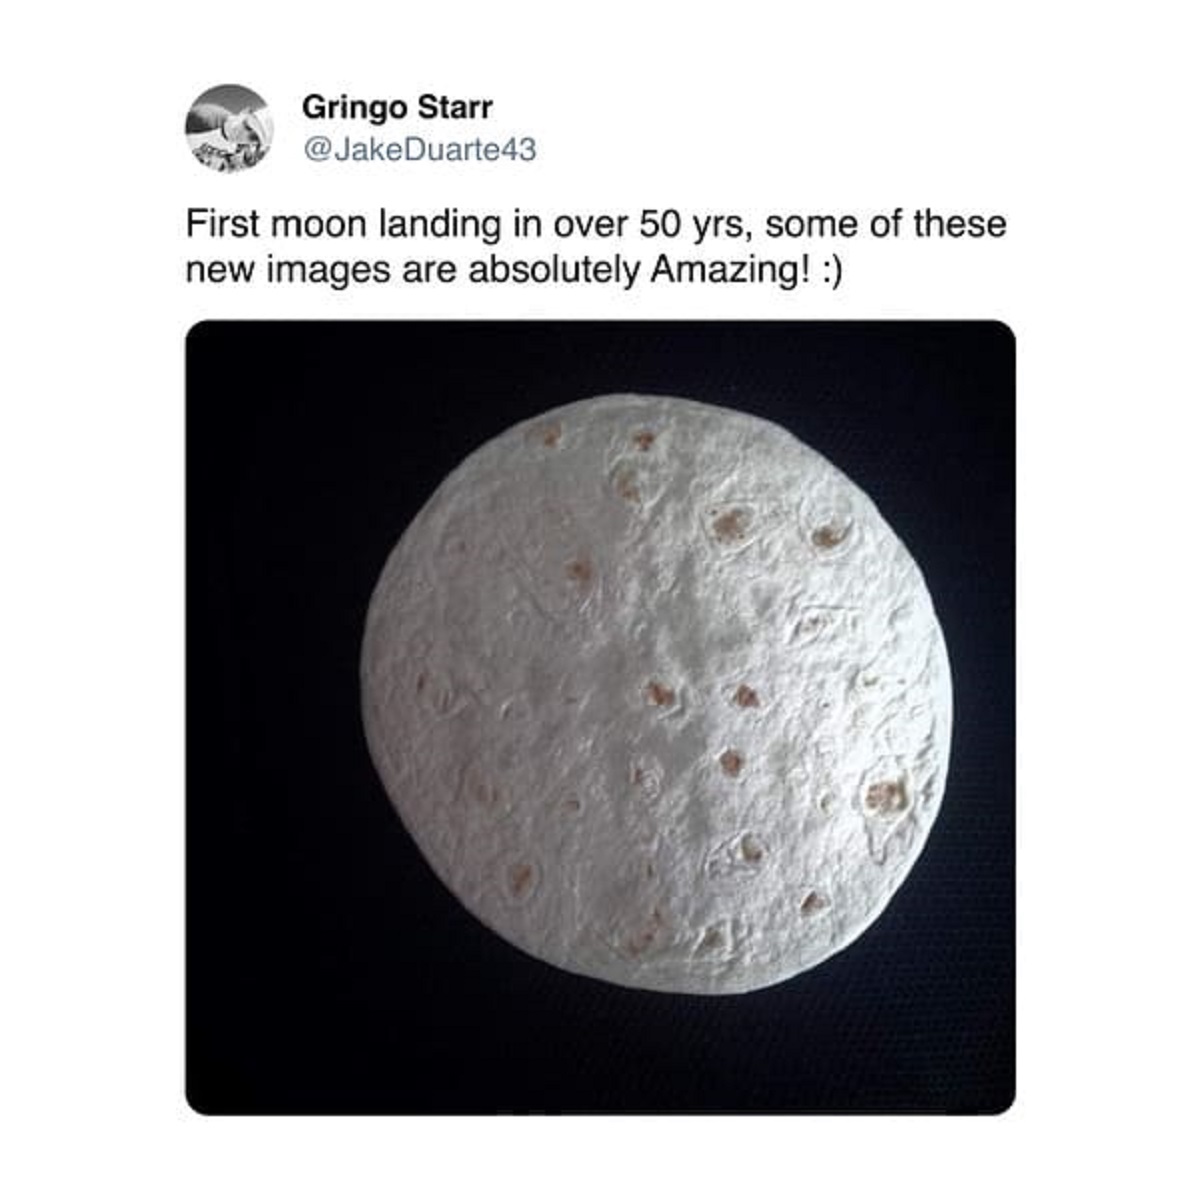 51 Funny Tweets From Twitter This Week